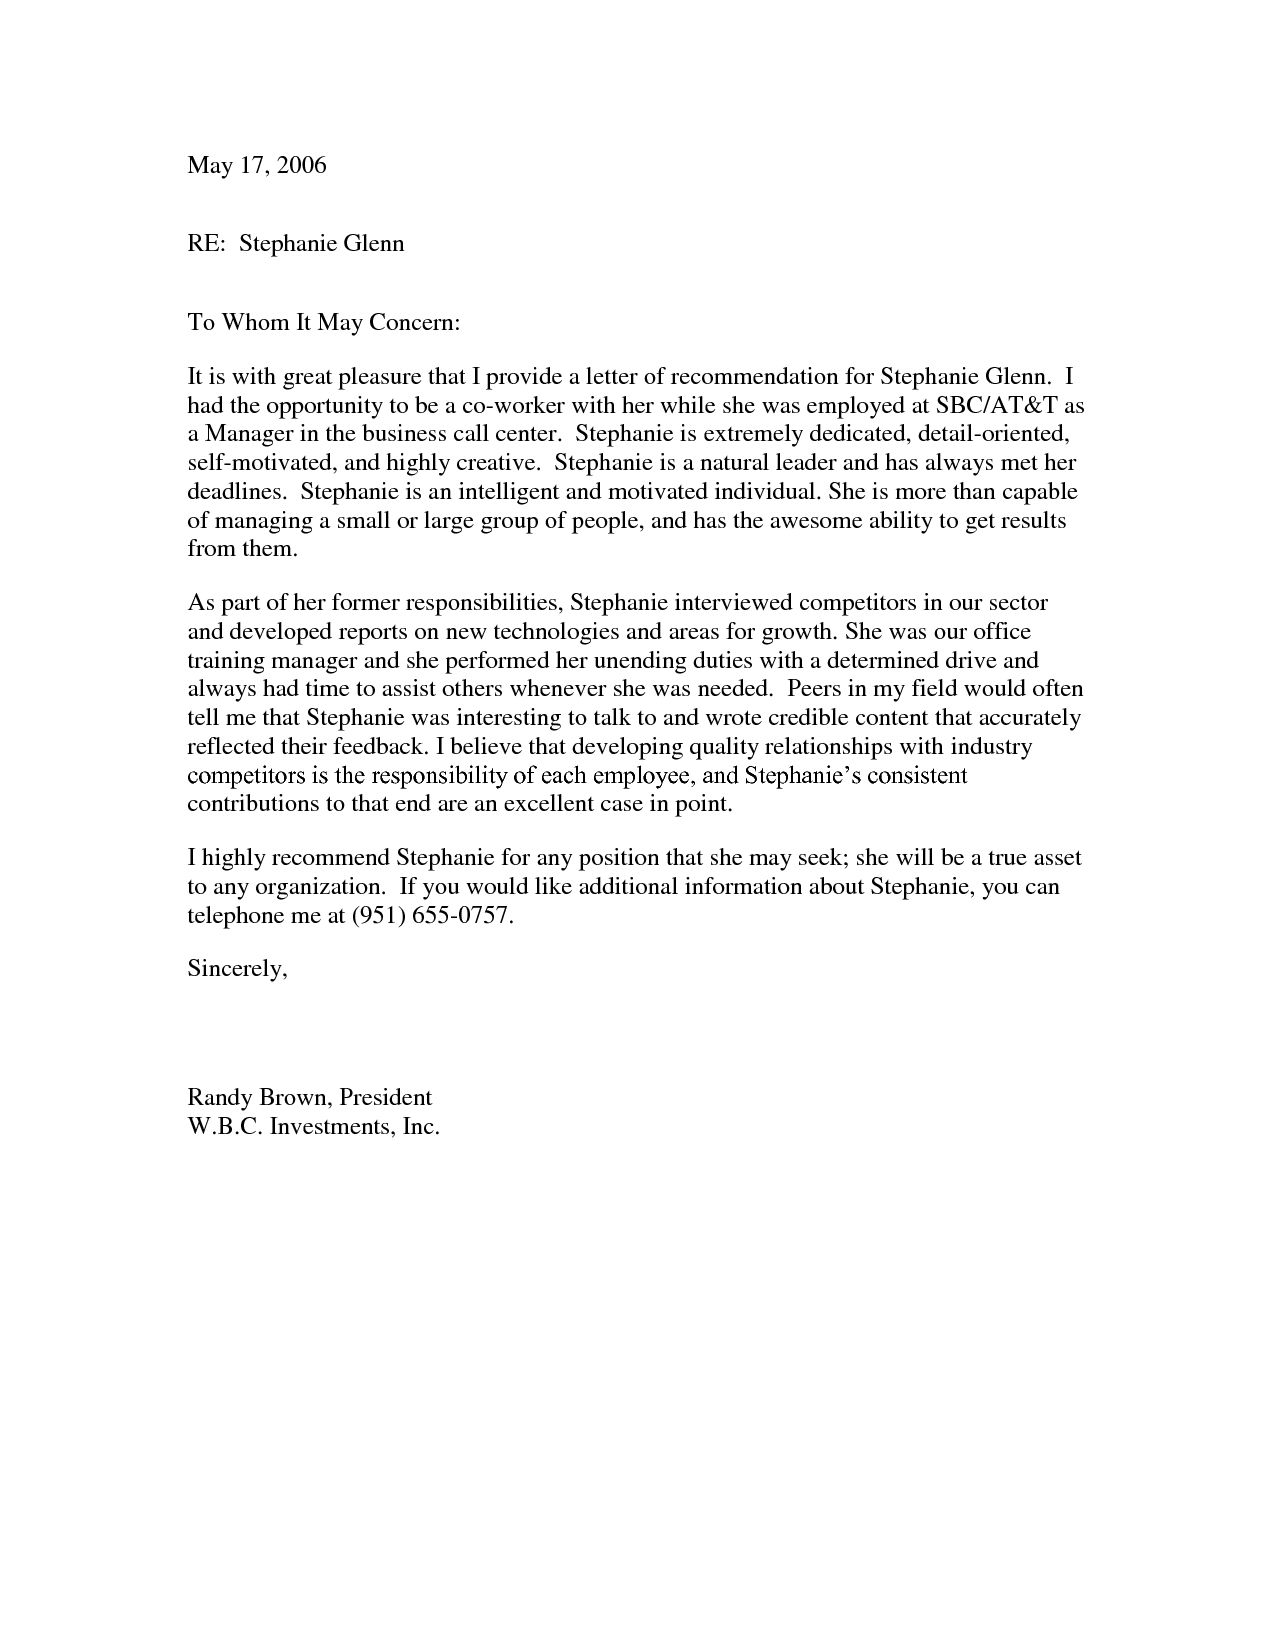 Sample Job Recommendation Letter For Coworker Akali within dimensions 1275 X 1650